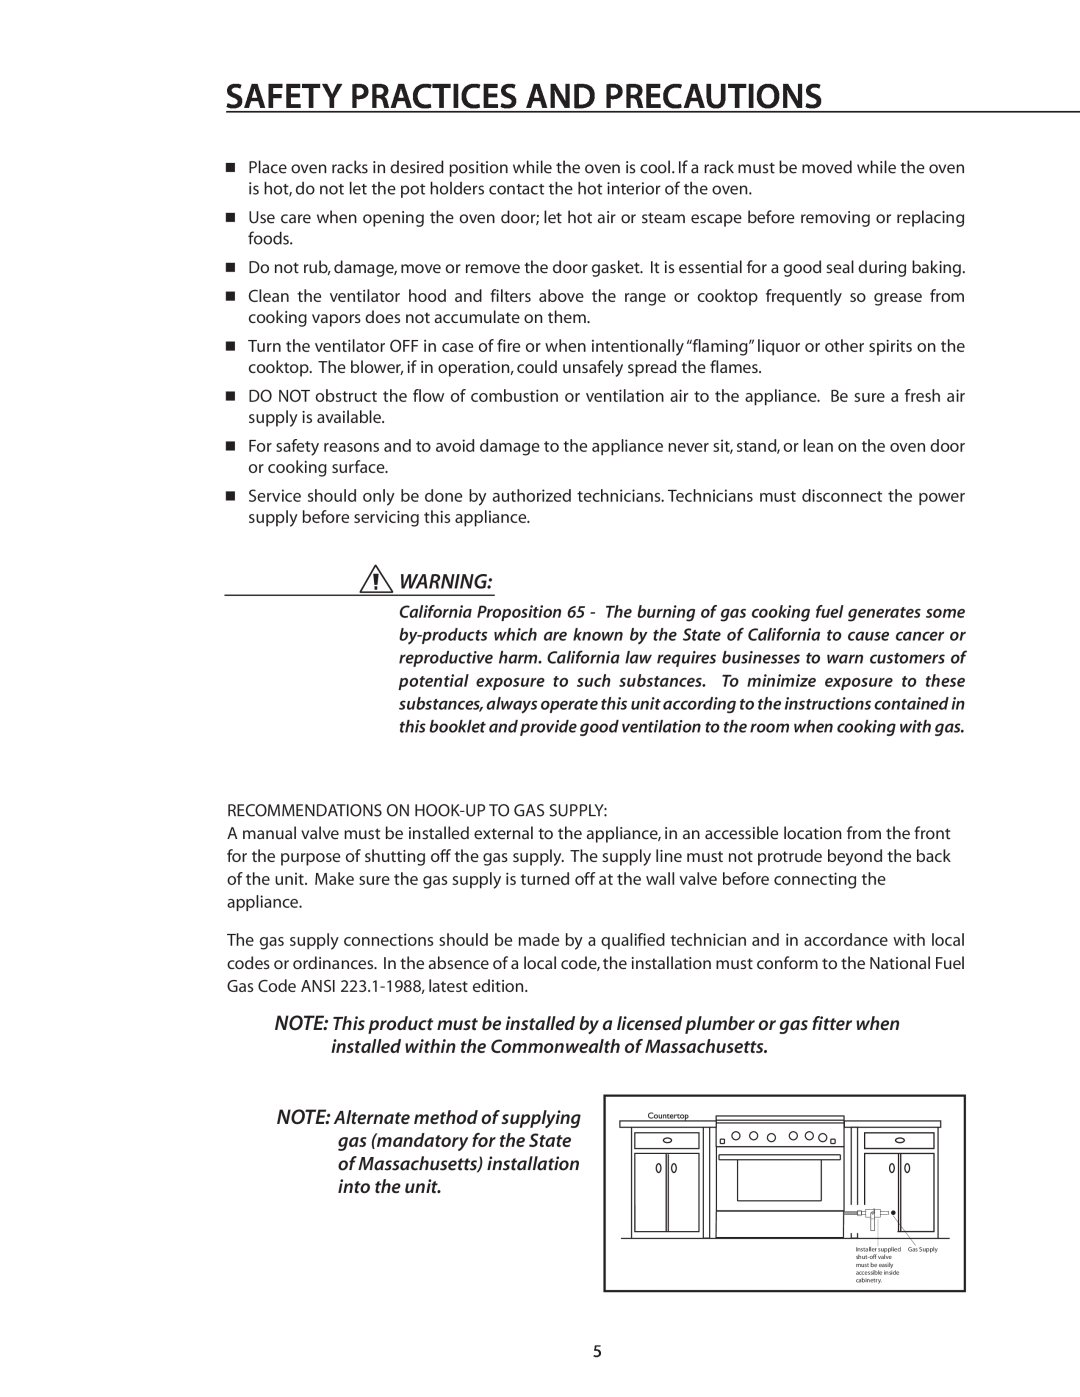 DCS RDS-305 manual Safety Practices And Precautions, Recommendations On Hook-Up To Gas Supply 